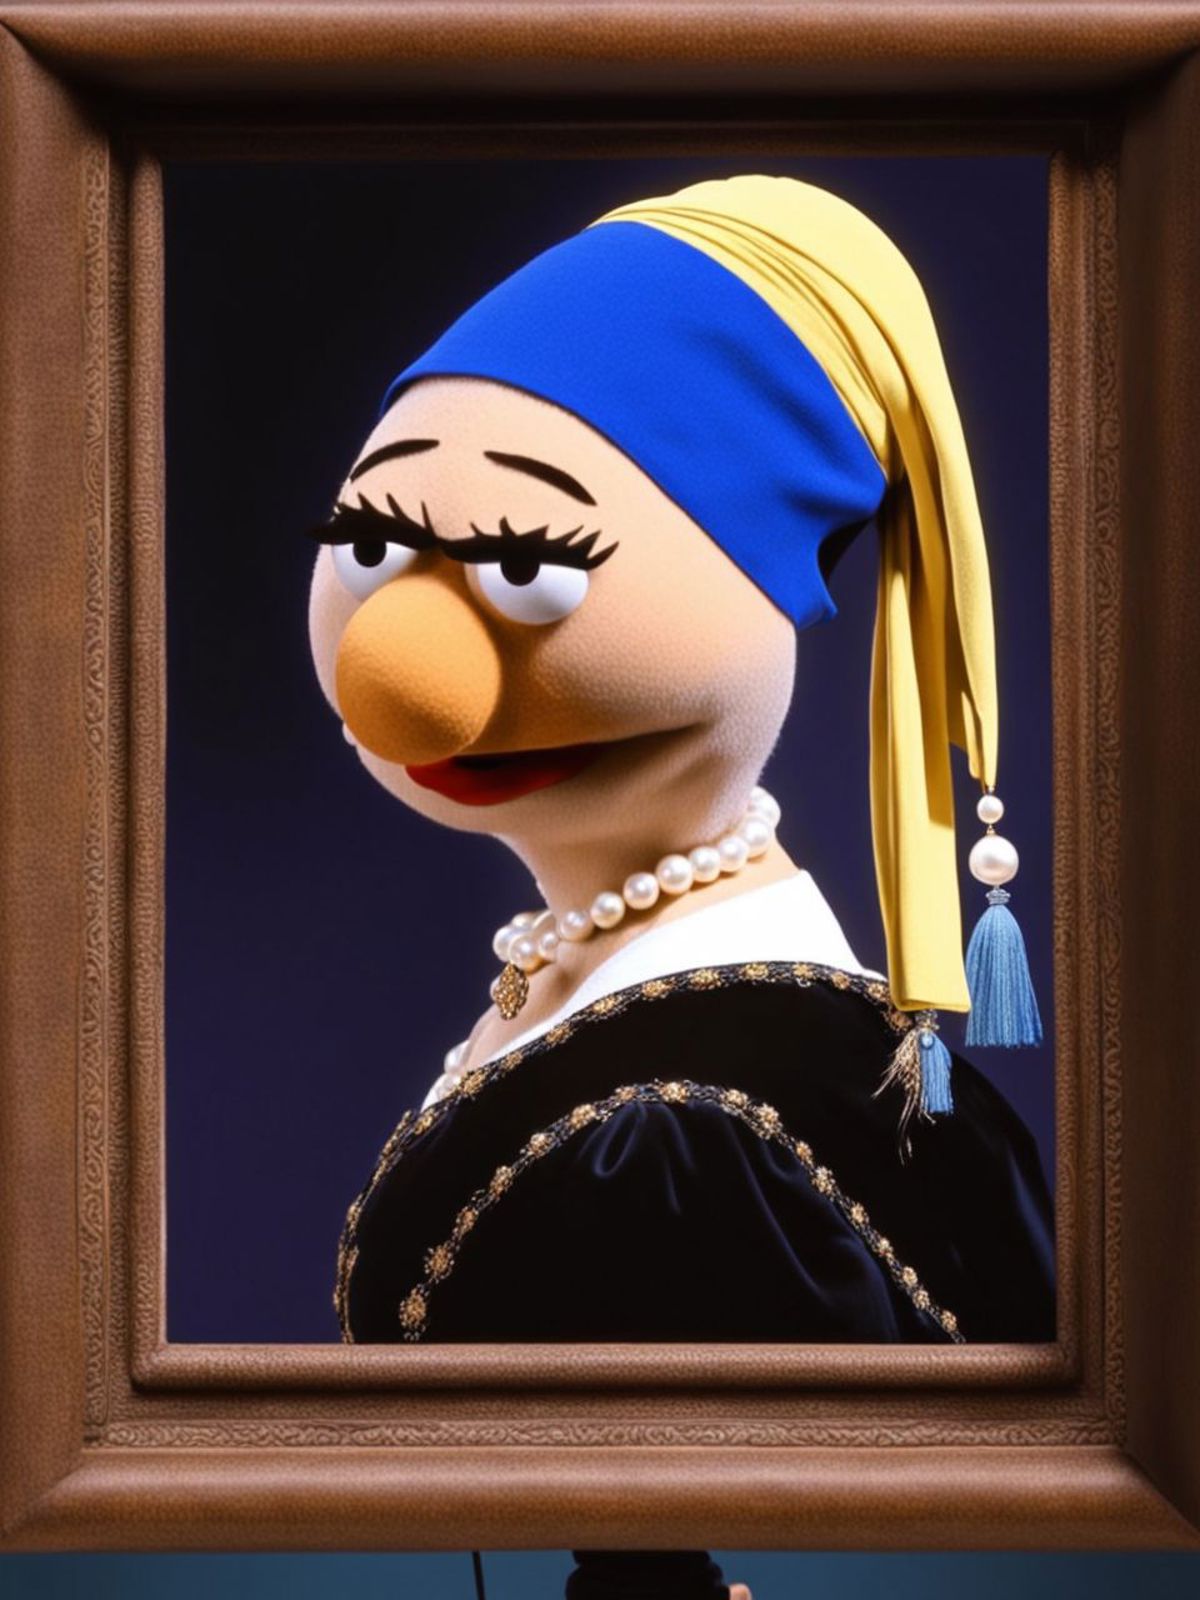 SDXL-MuppetShow-Lora image by norod78